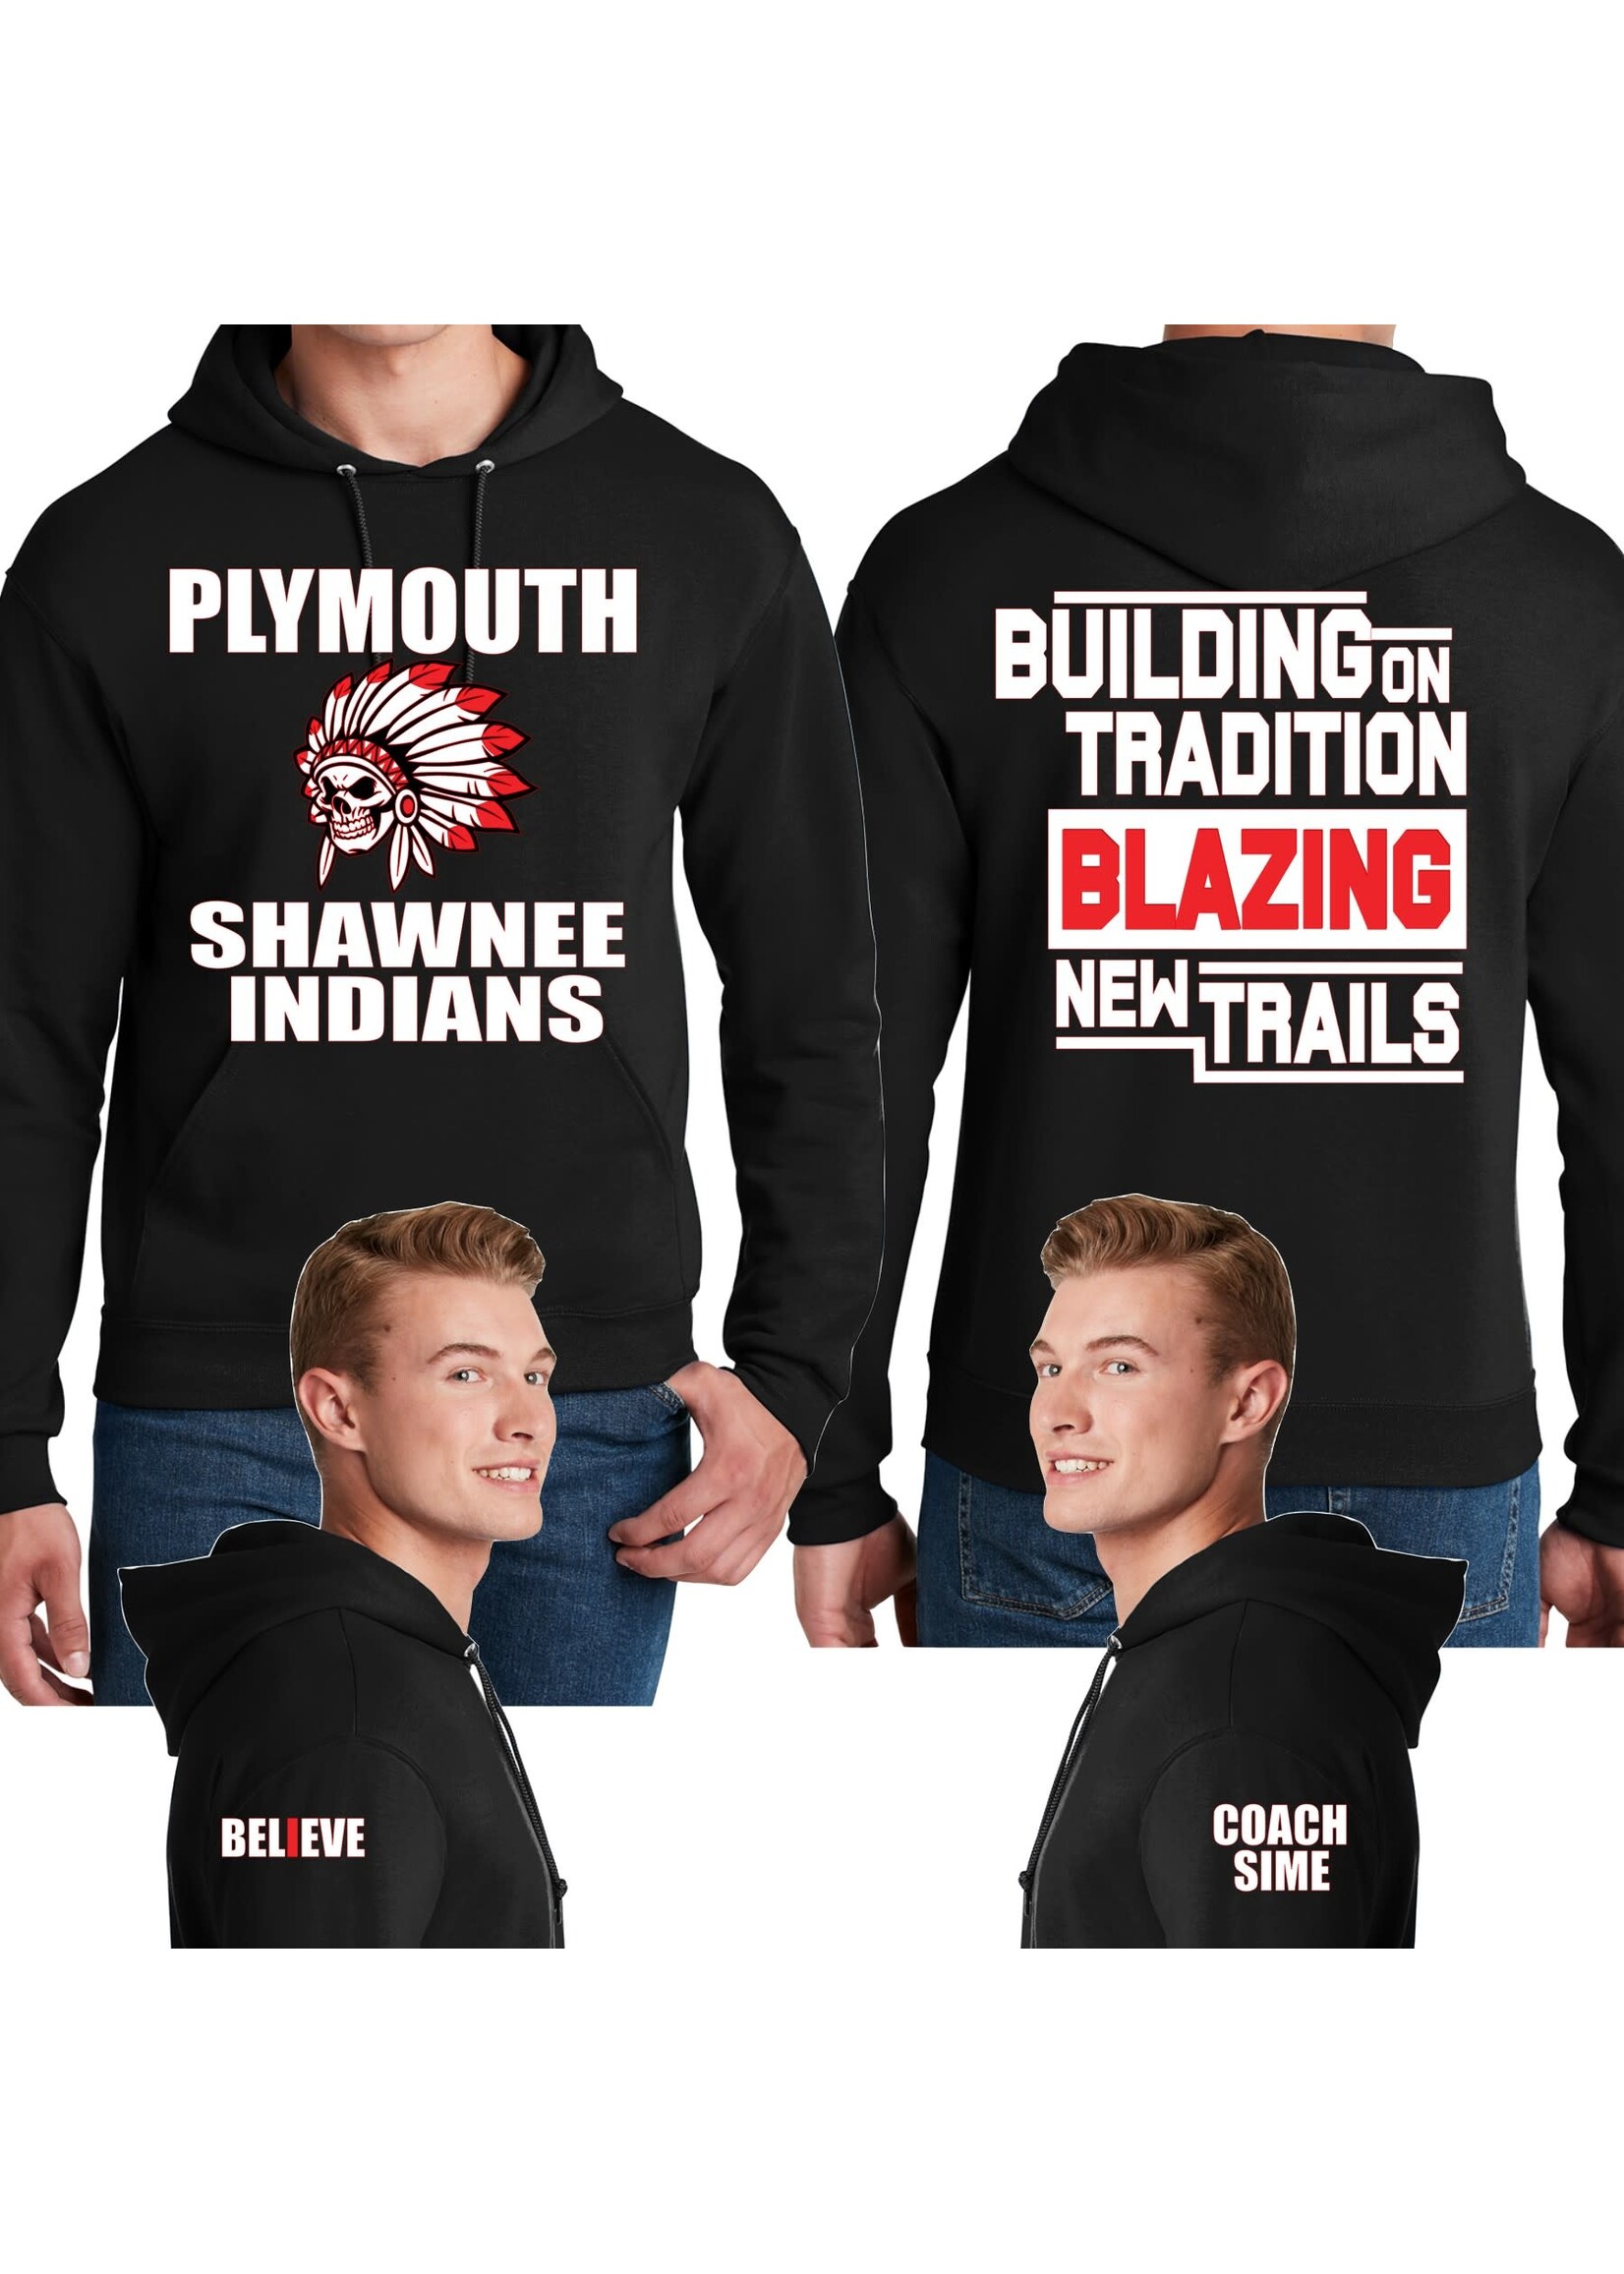 Plymouth Shawnee Indians Blazing New Trails Hoodie